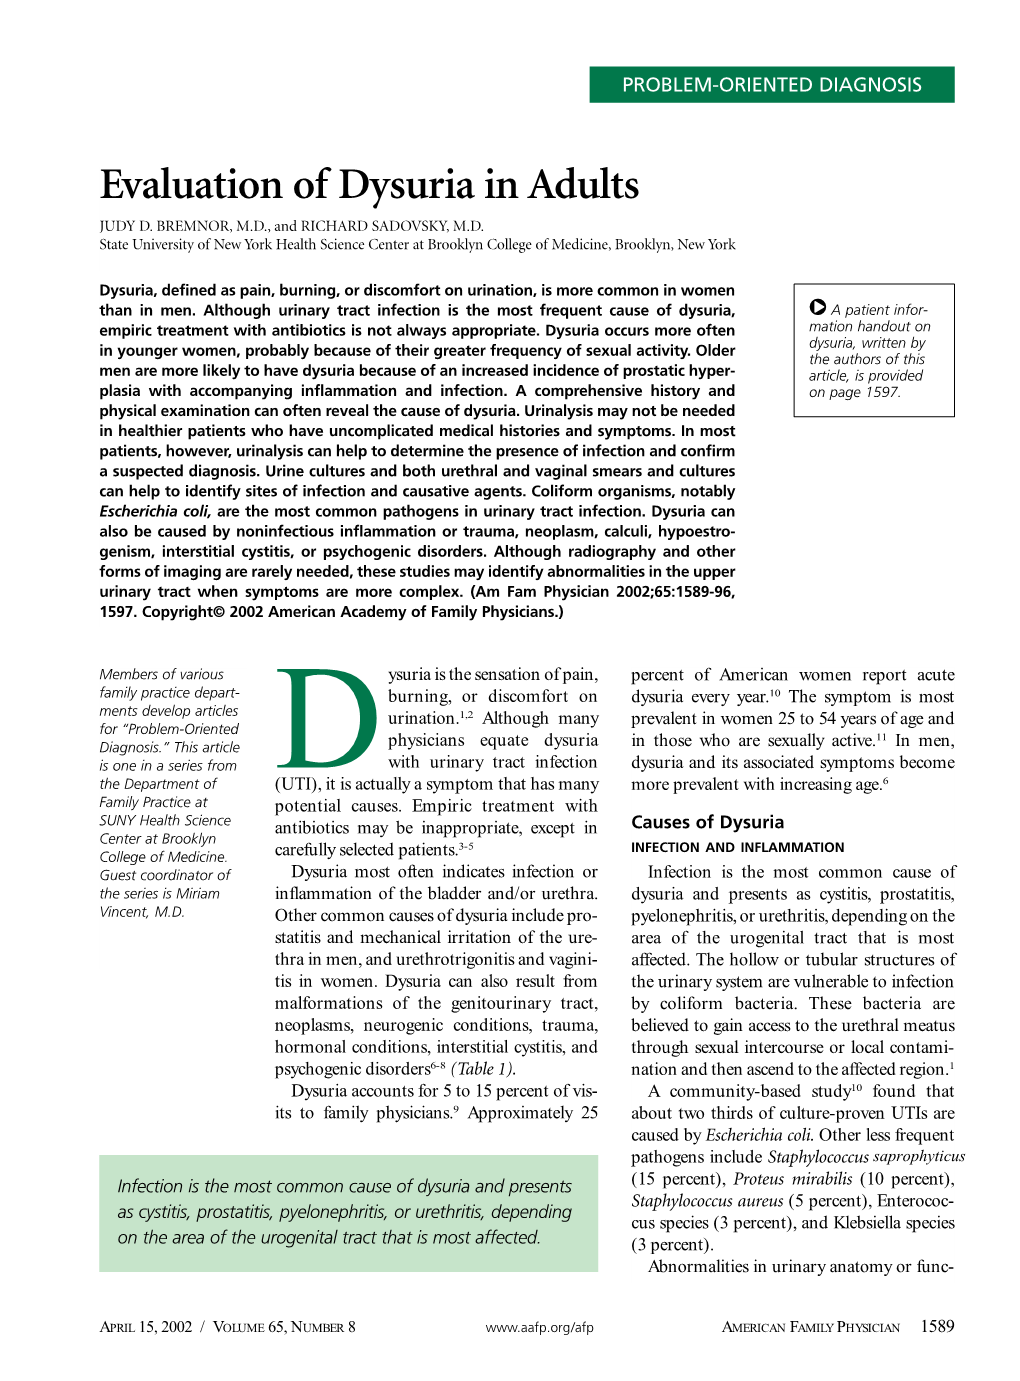 Evaluation of Dysuria in Adults -- American Family Physician